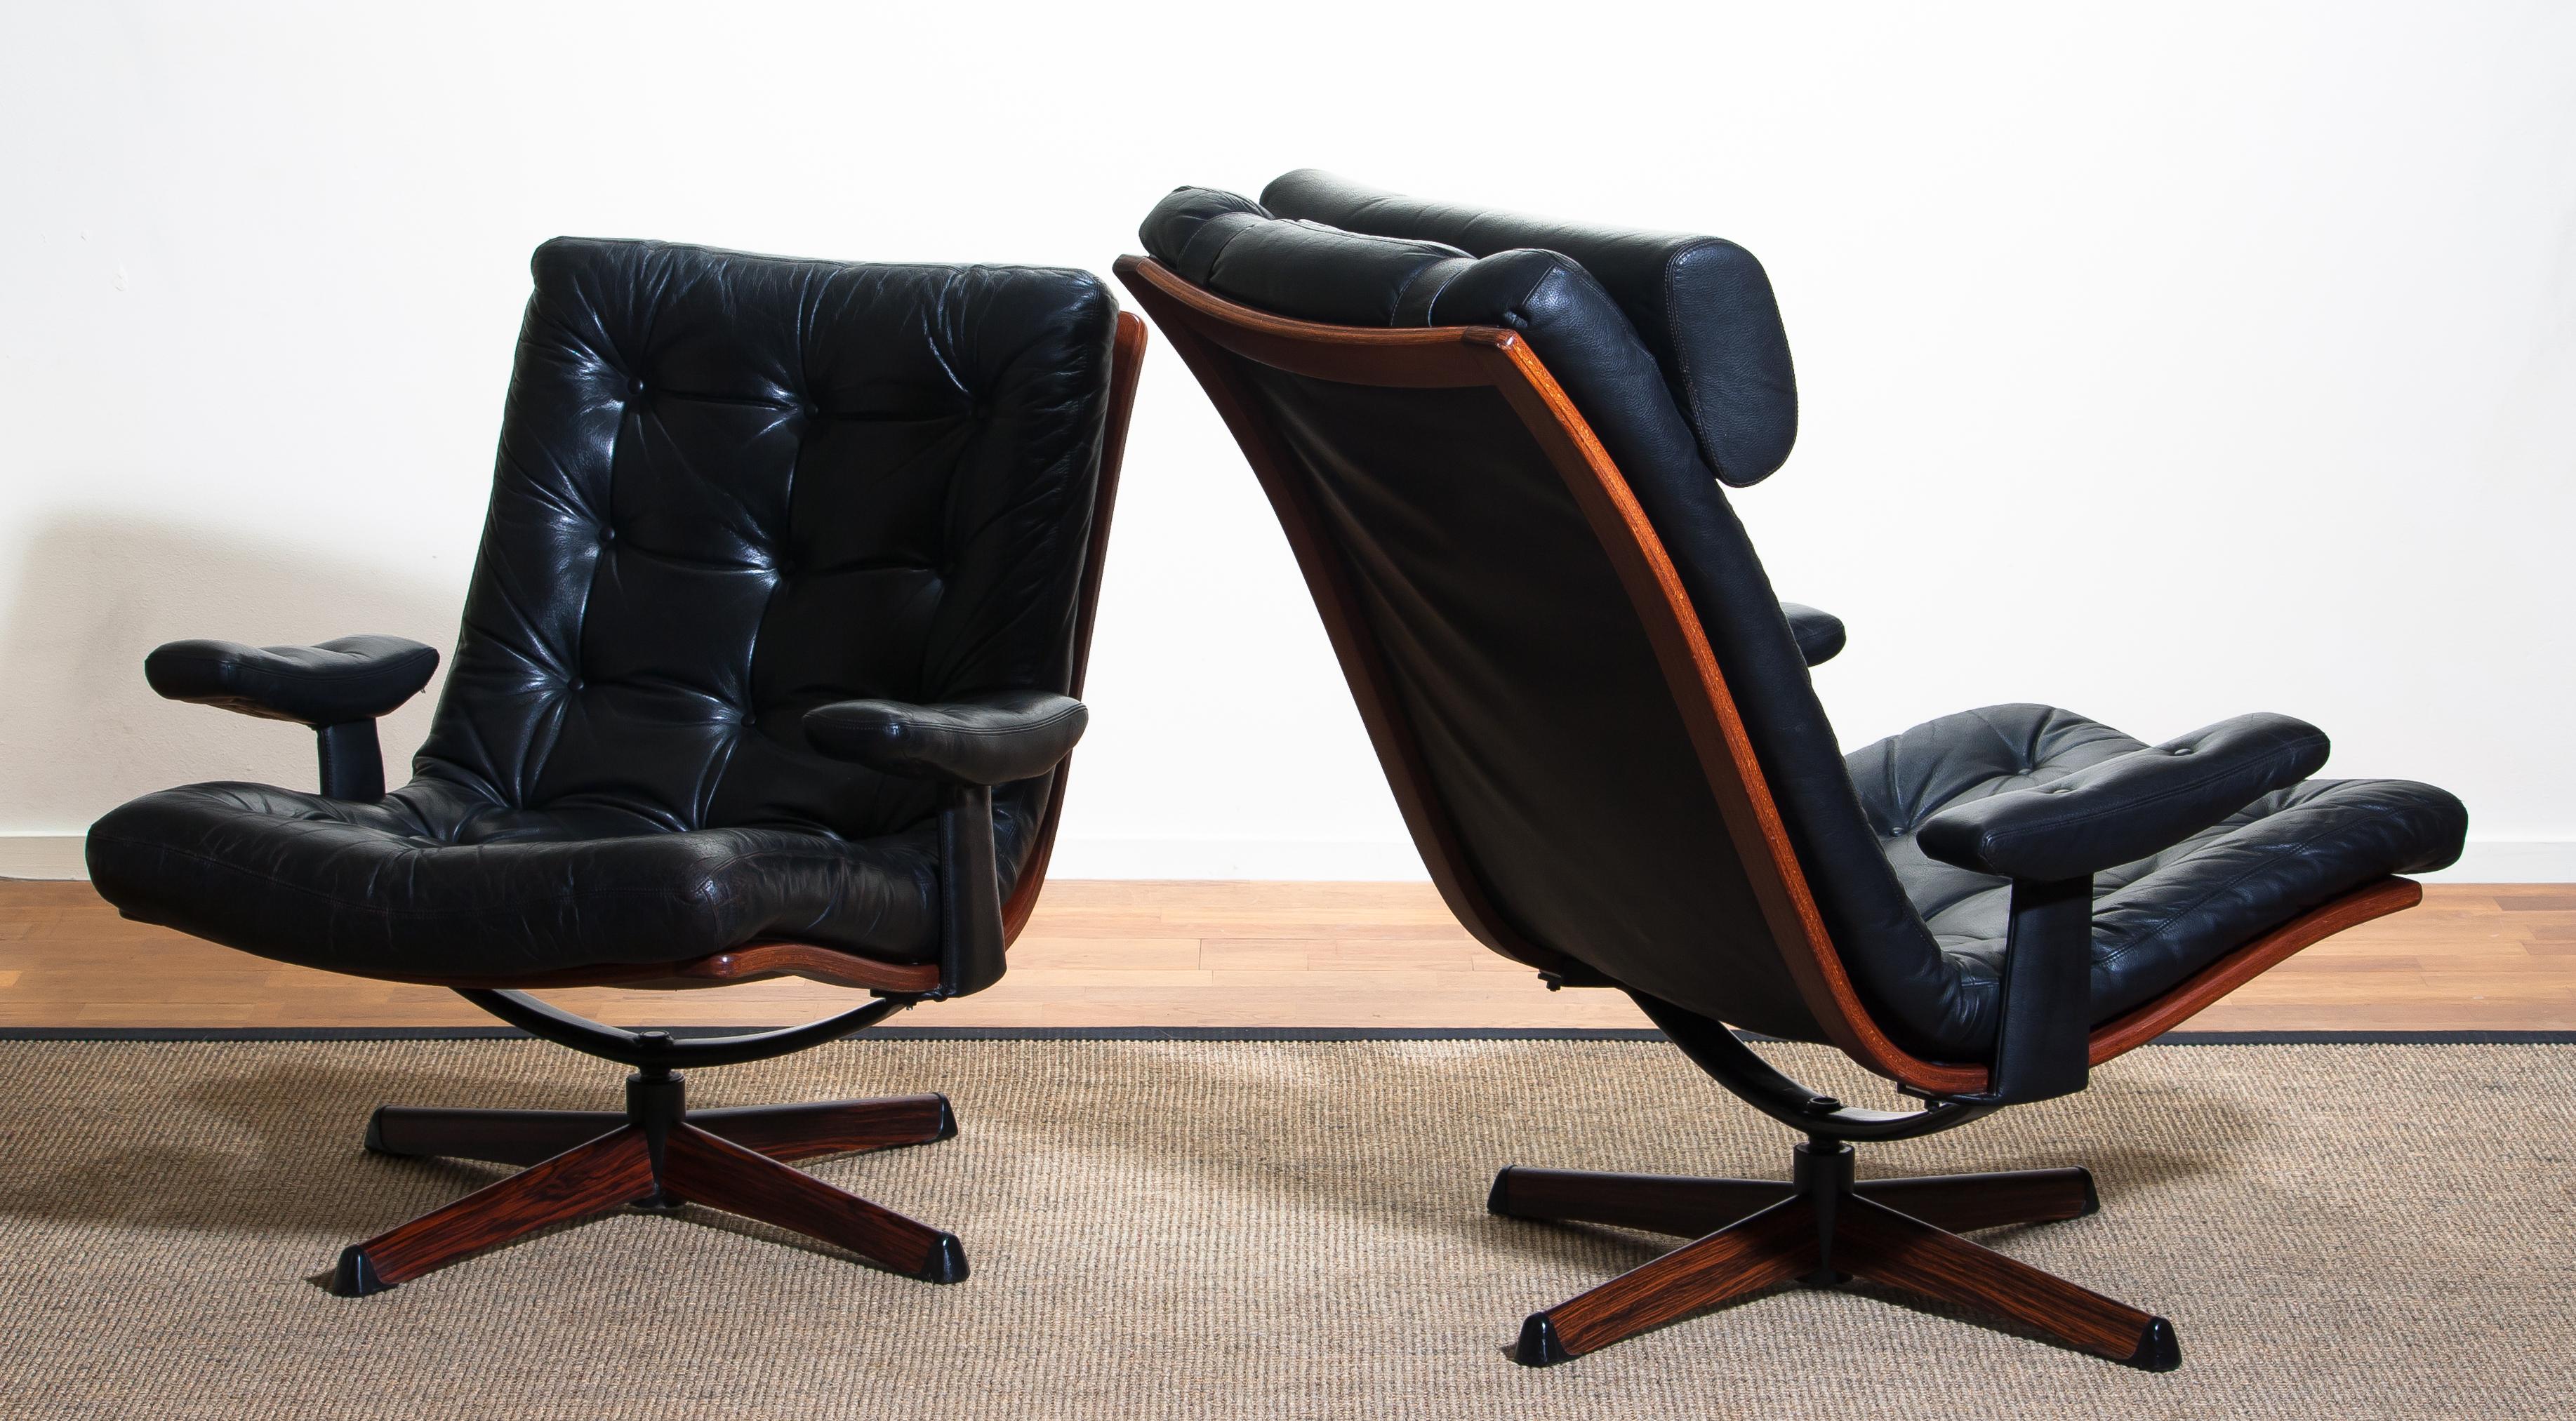 1960s Matching Pair of Black Leather Swivel Chairs by Gote Design Nassjo Sweden In Good Condition In Silvolde, Gelderland